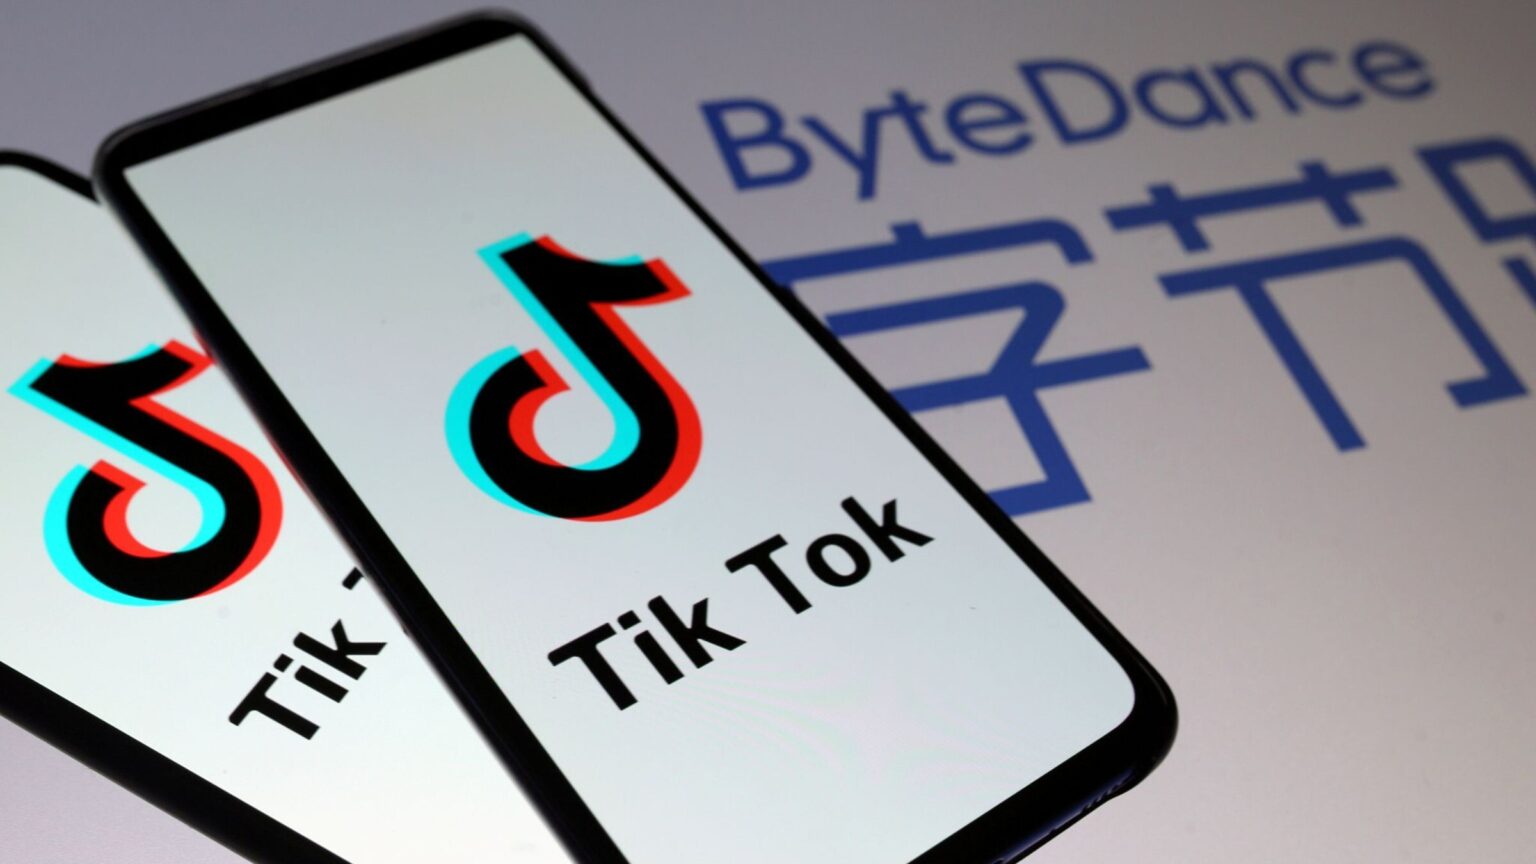 Trump forced ByteDance to sell TikTok to U.S. company Oracle. How will the app change now that it's owned by Oracle? Here's what we know so far.